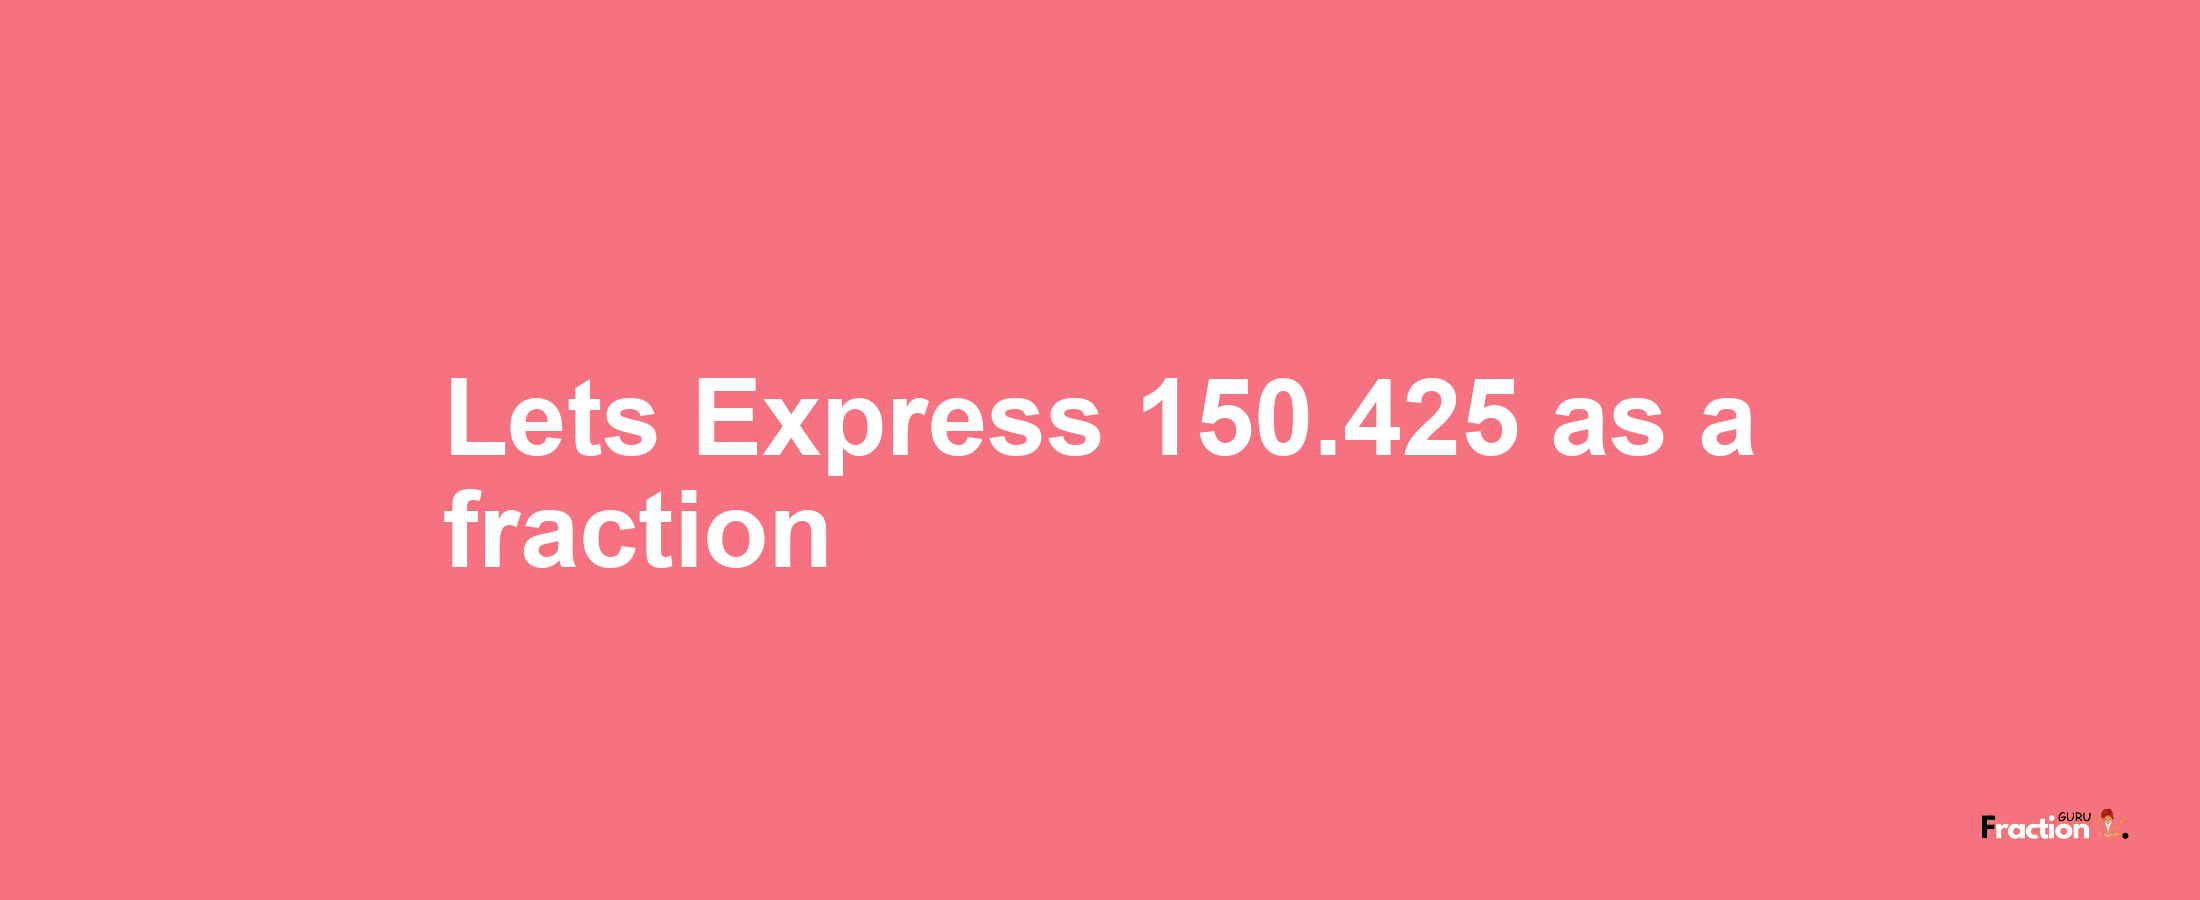 Lets Express 150.425 as afraction